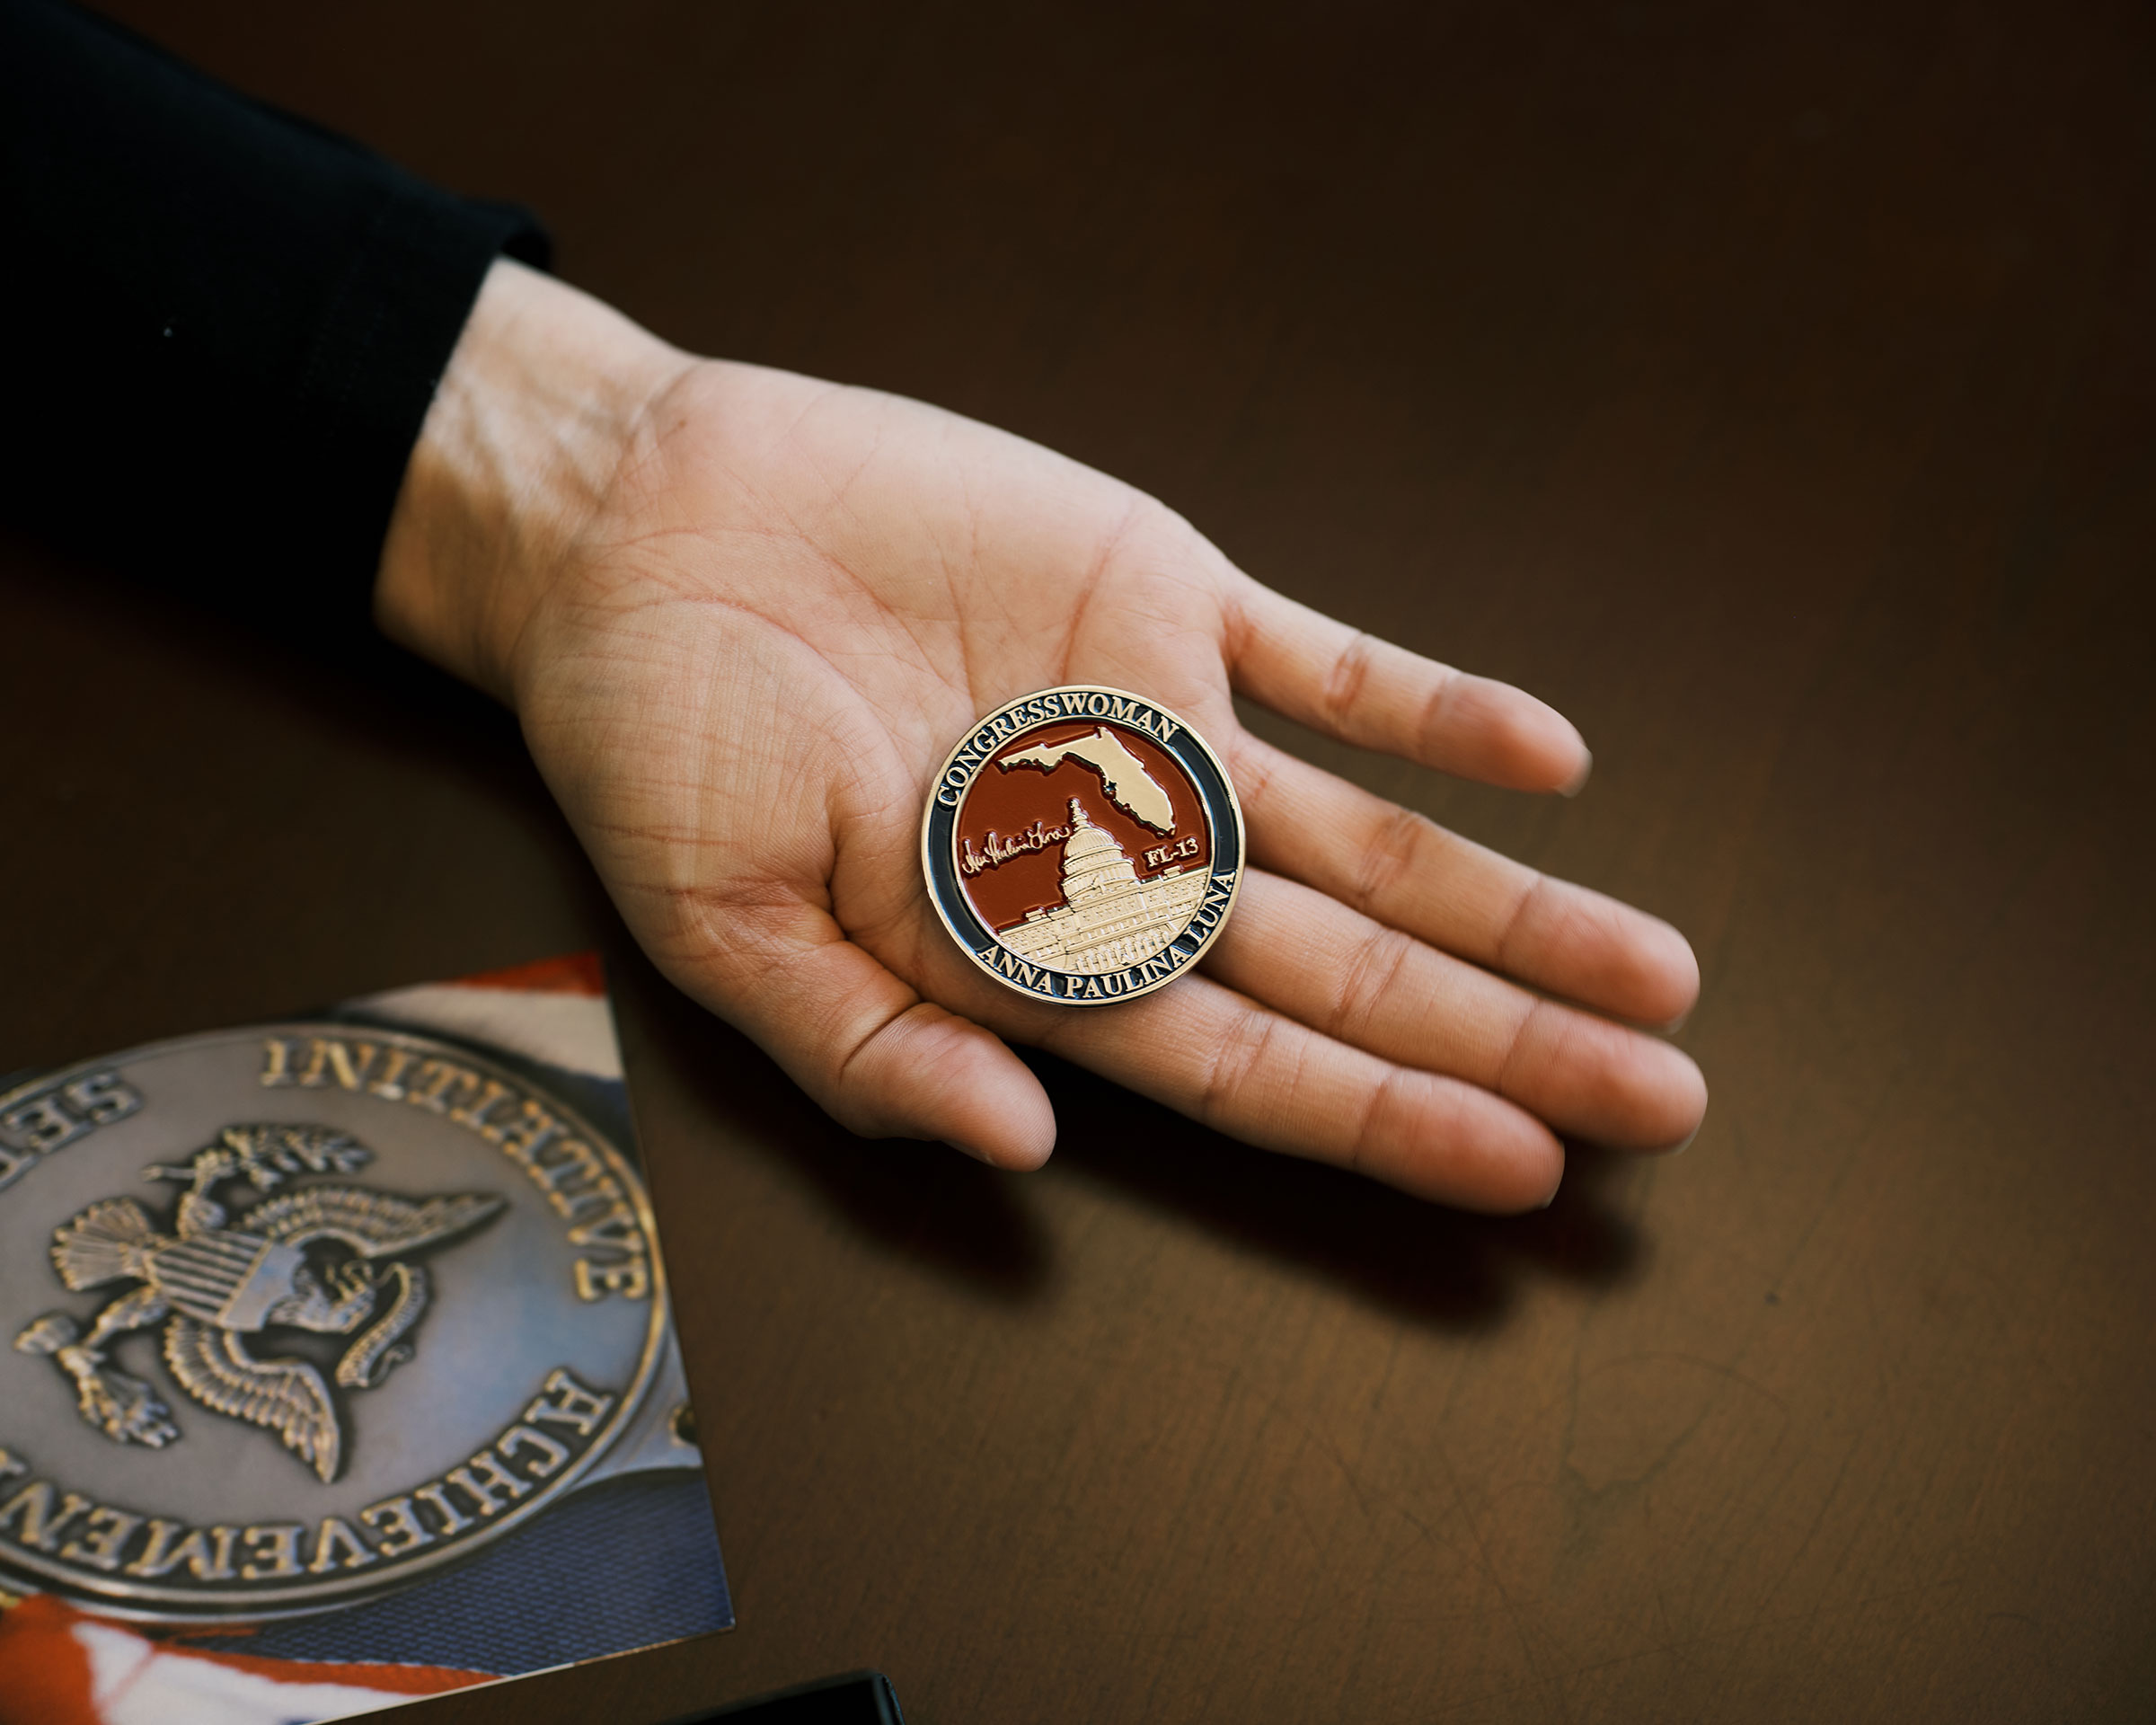 Luna holds a coin emblazoned with her name. (Zack Wittman for TIME)